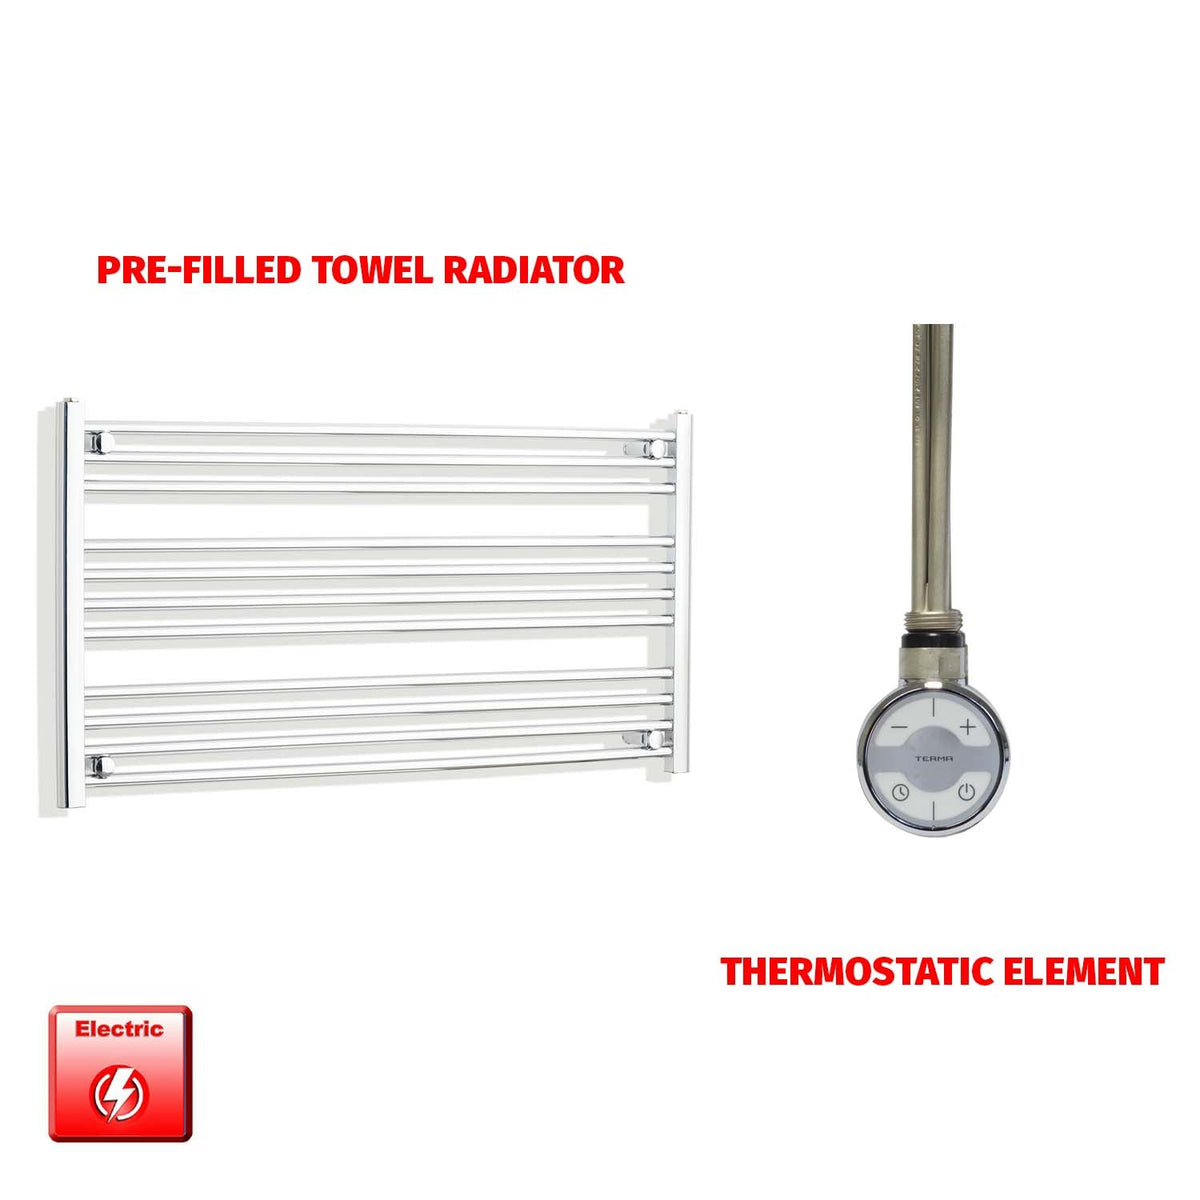 600mm High 1300mm Wide Pre-Filled Electric Heated Towel Radiator Straight Chrome MOA Thermostatic element no timer